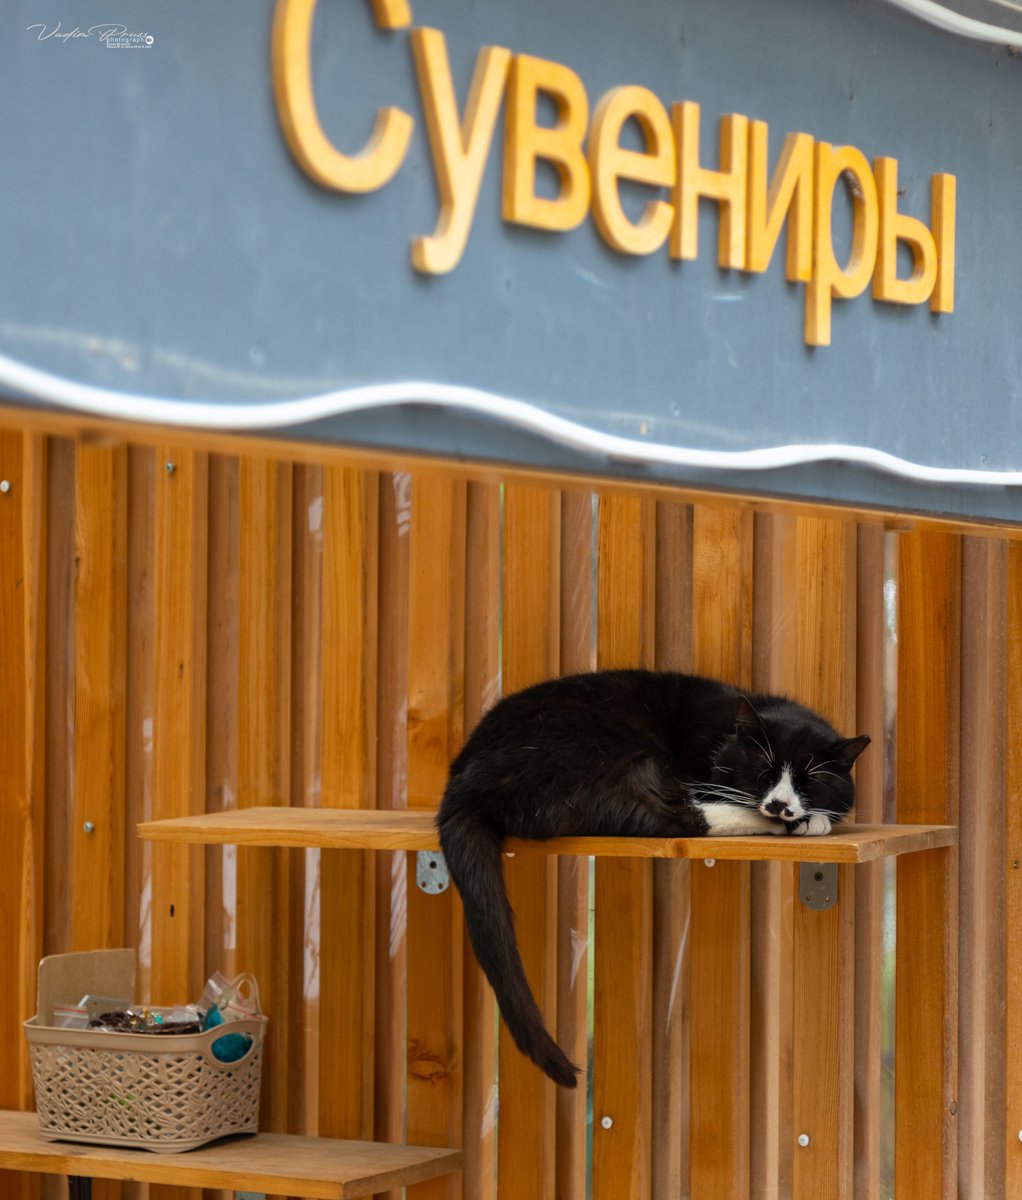 souvenir (sign: ‘Souvenirs’) #photo by Vadim Svirin on 35photo #catgang #cats #CatsOfTwitter #Caturday